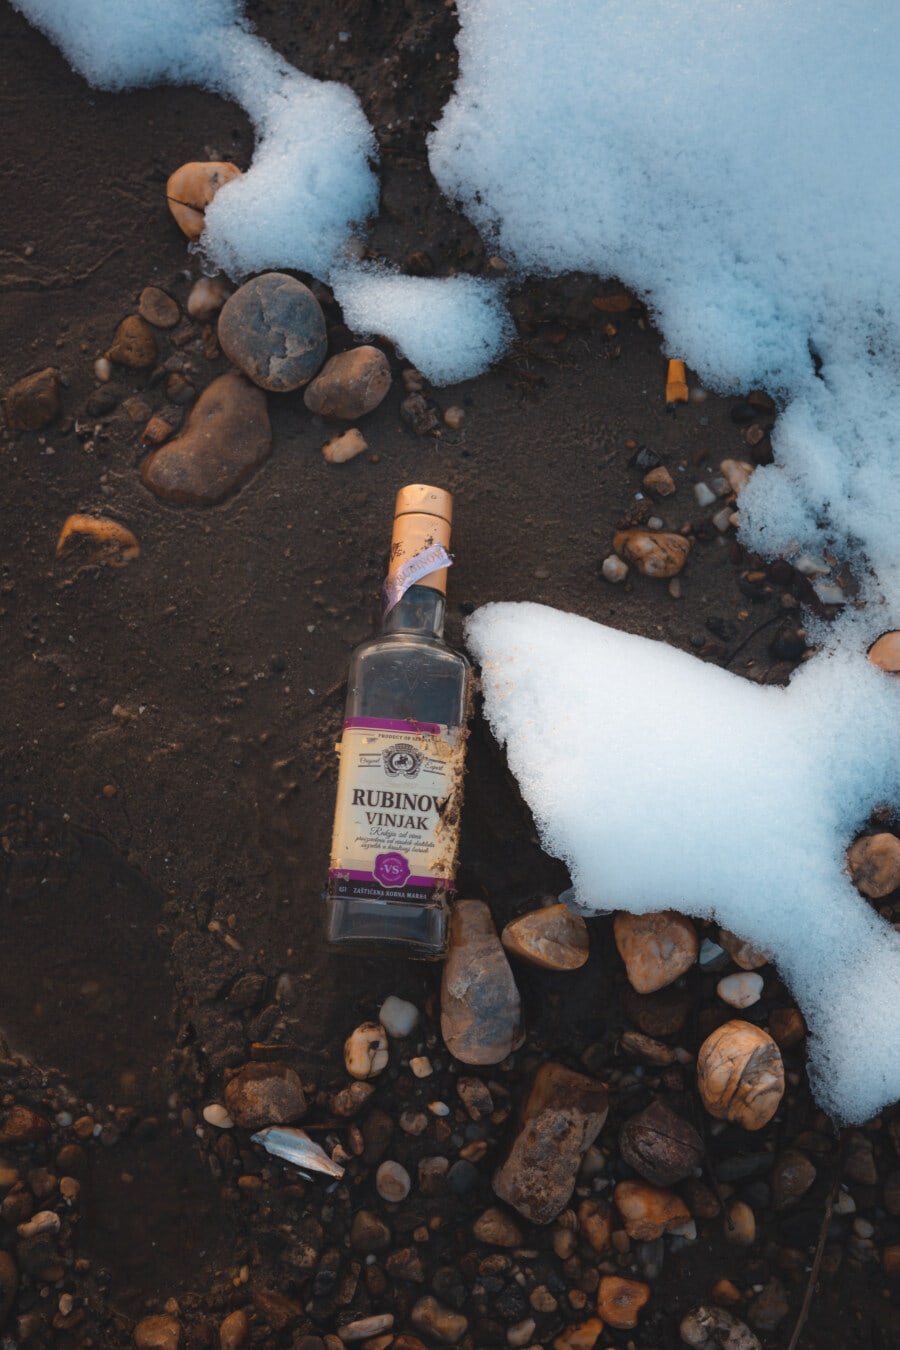 bottle, alcohol, garbage, ground, snowy, wet, sand, winter, snow, cold